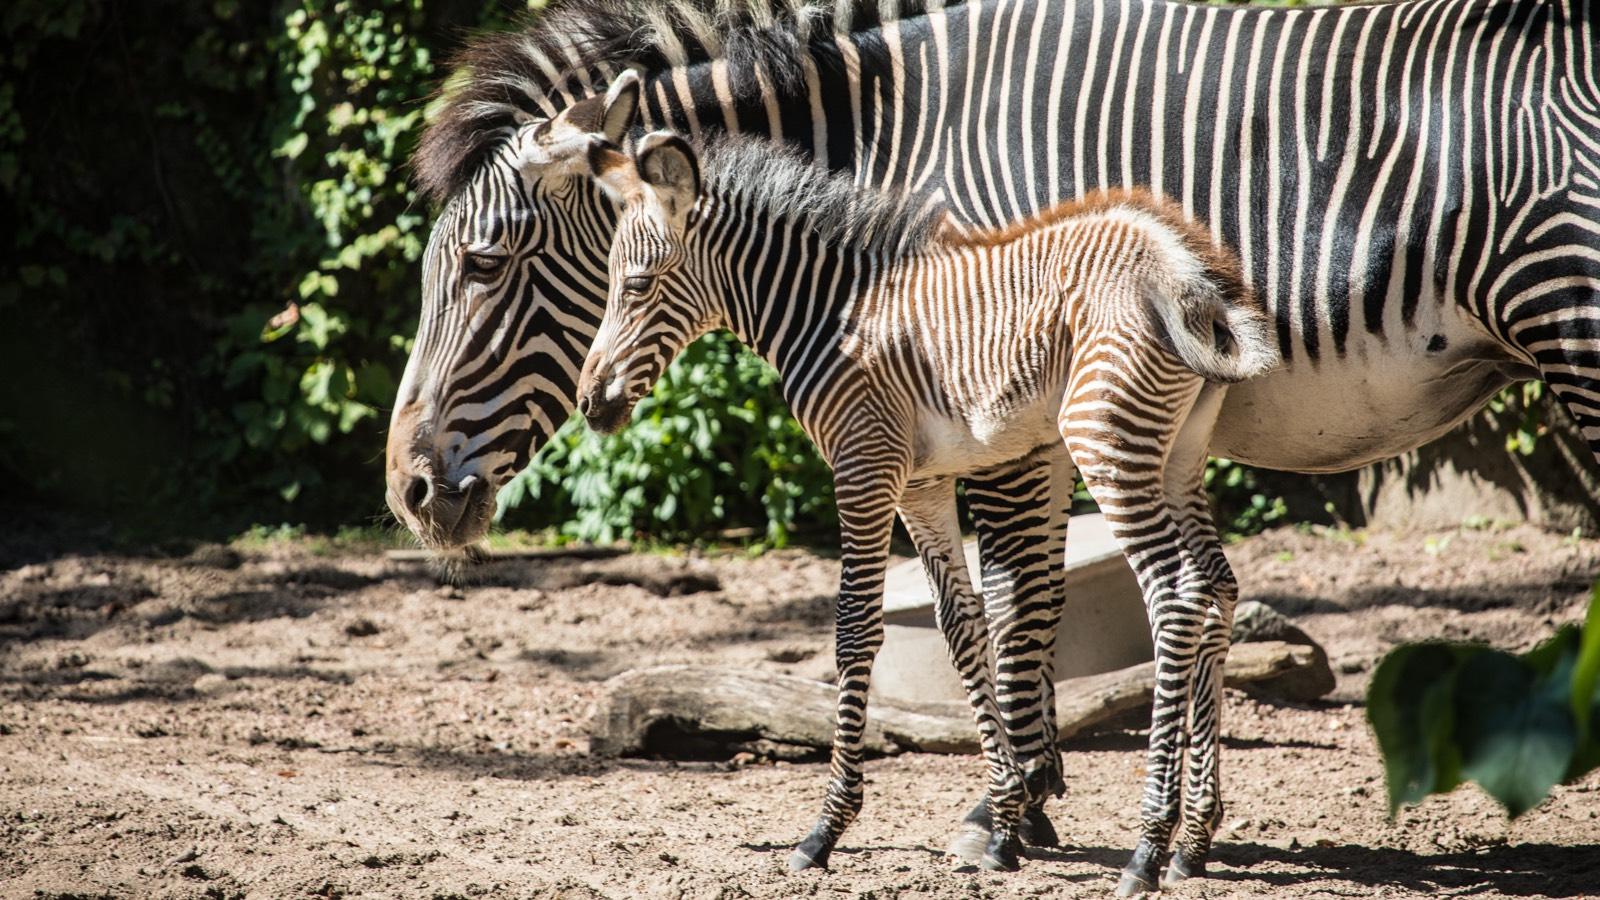 A baby Grevy's zebra was born at the Lincoln Park Zoo Aug. 14. (Christopher Bijalba / Lincoln Park Zoo)